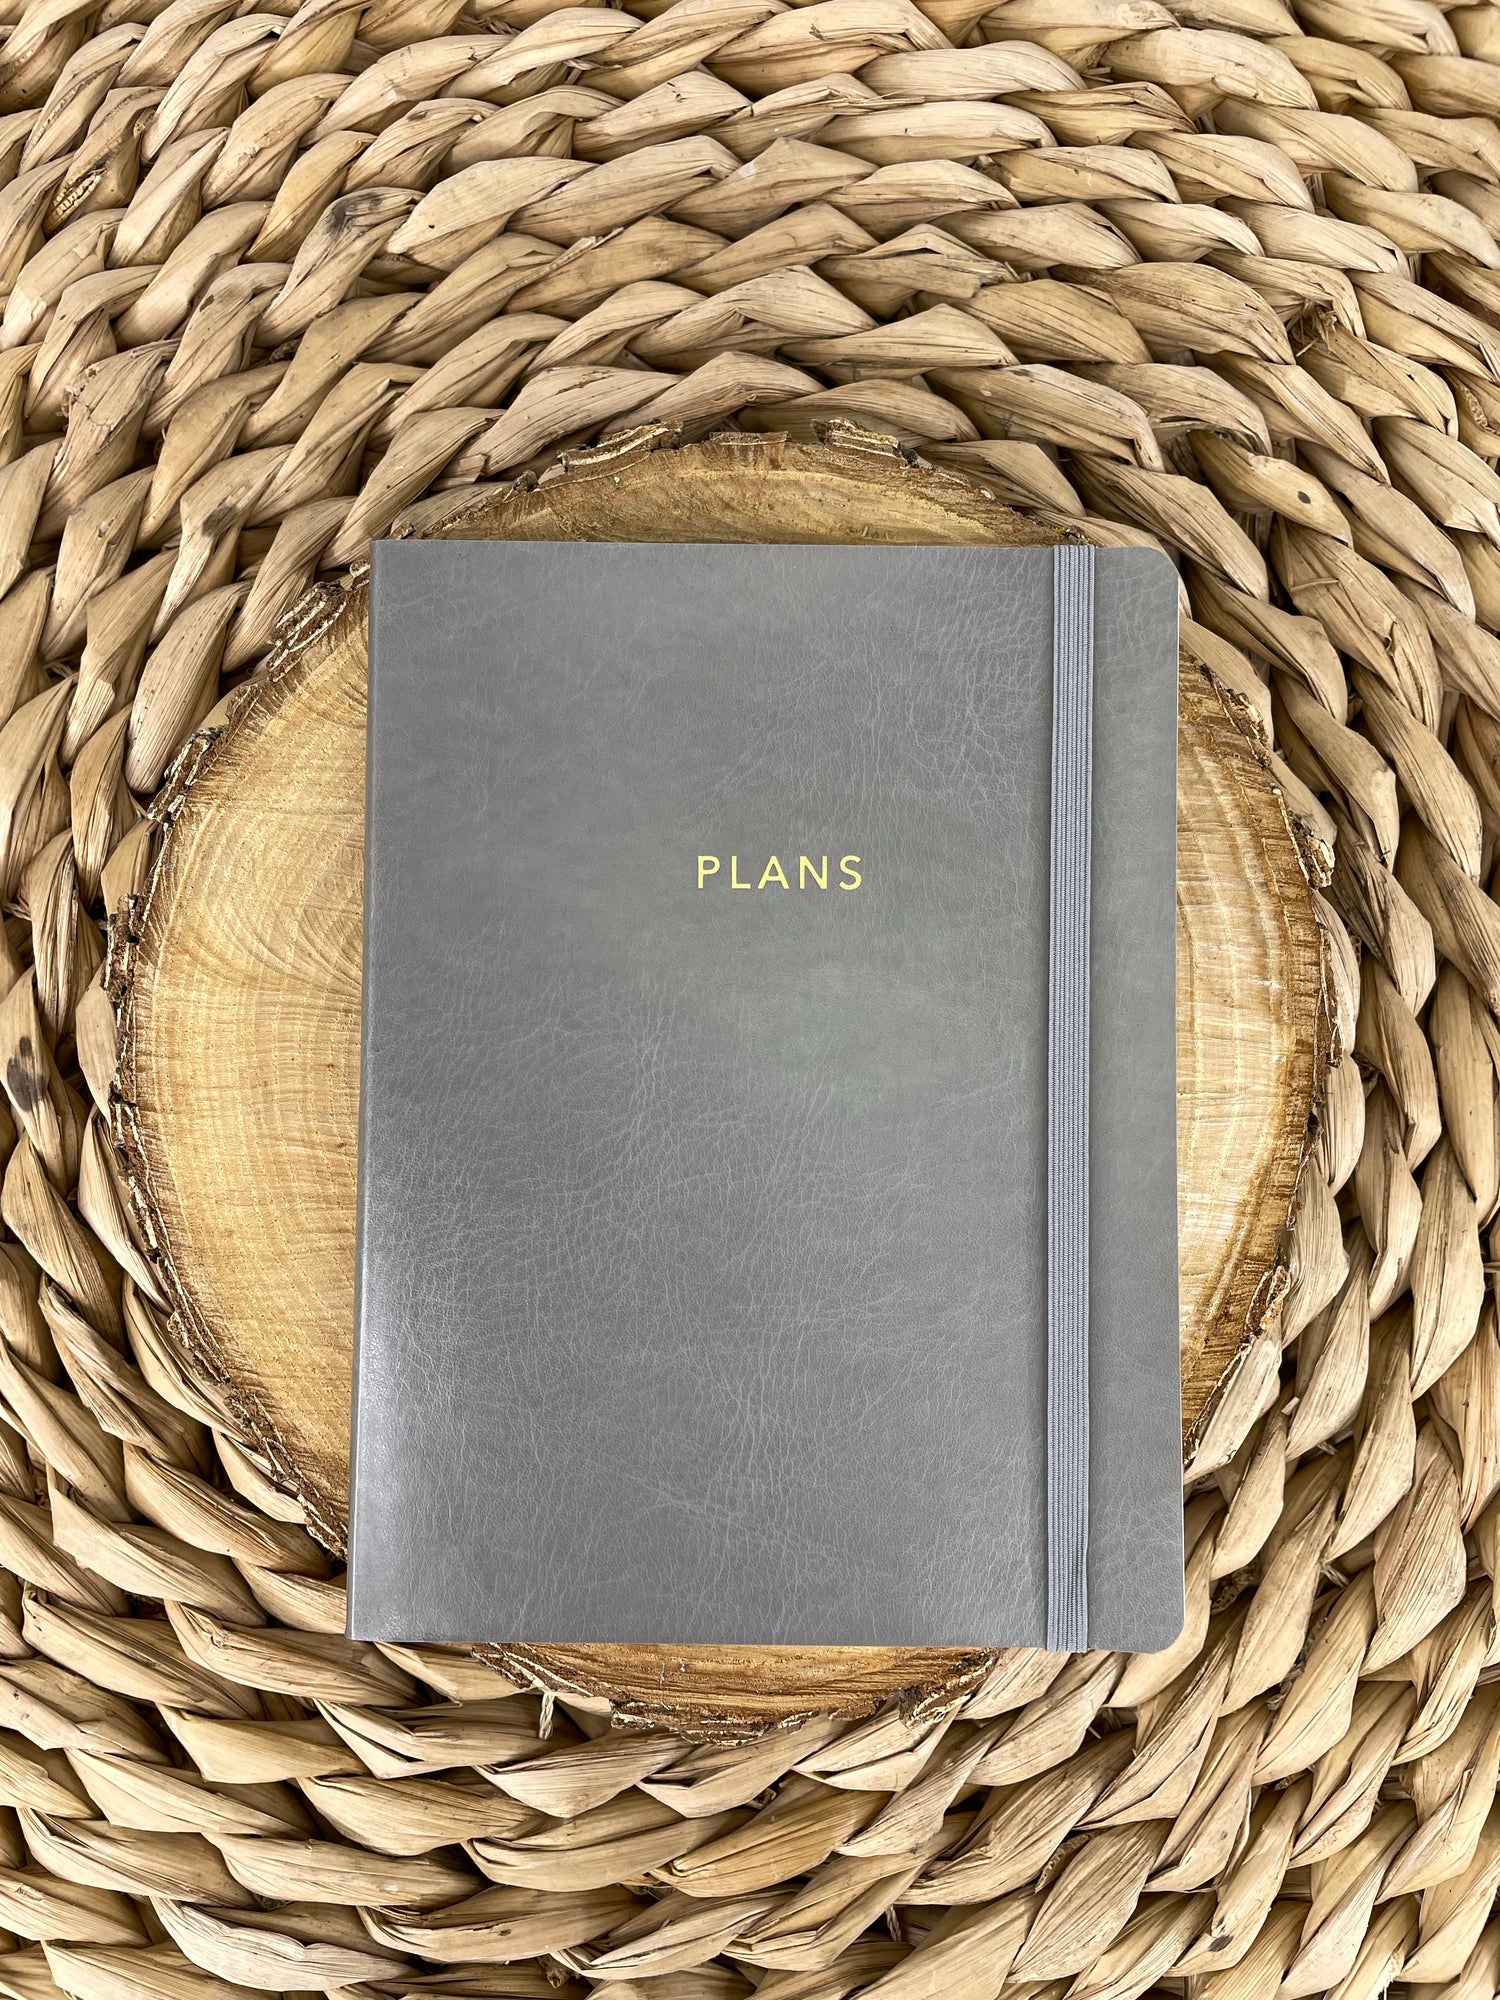 PLANS: leather journal